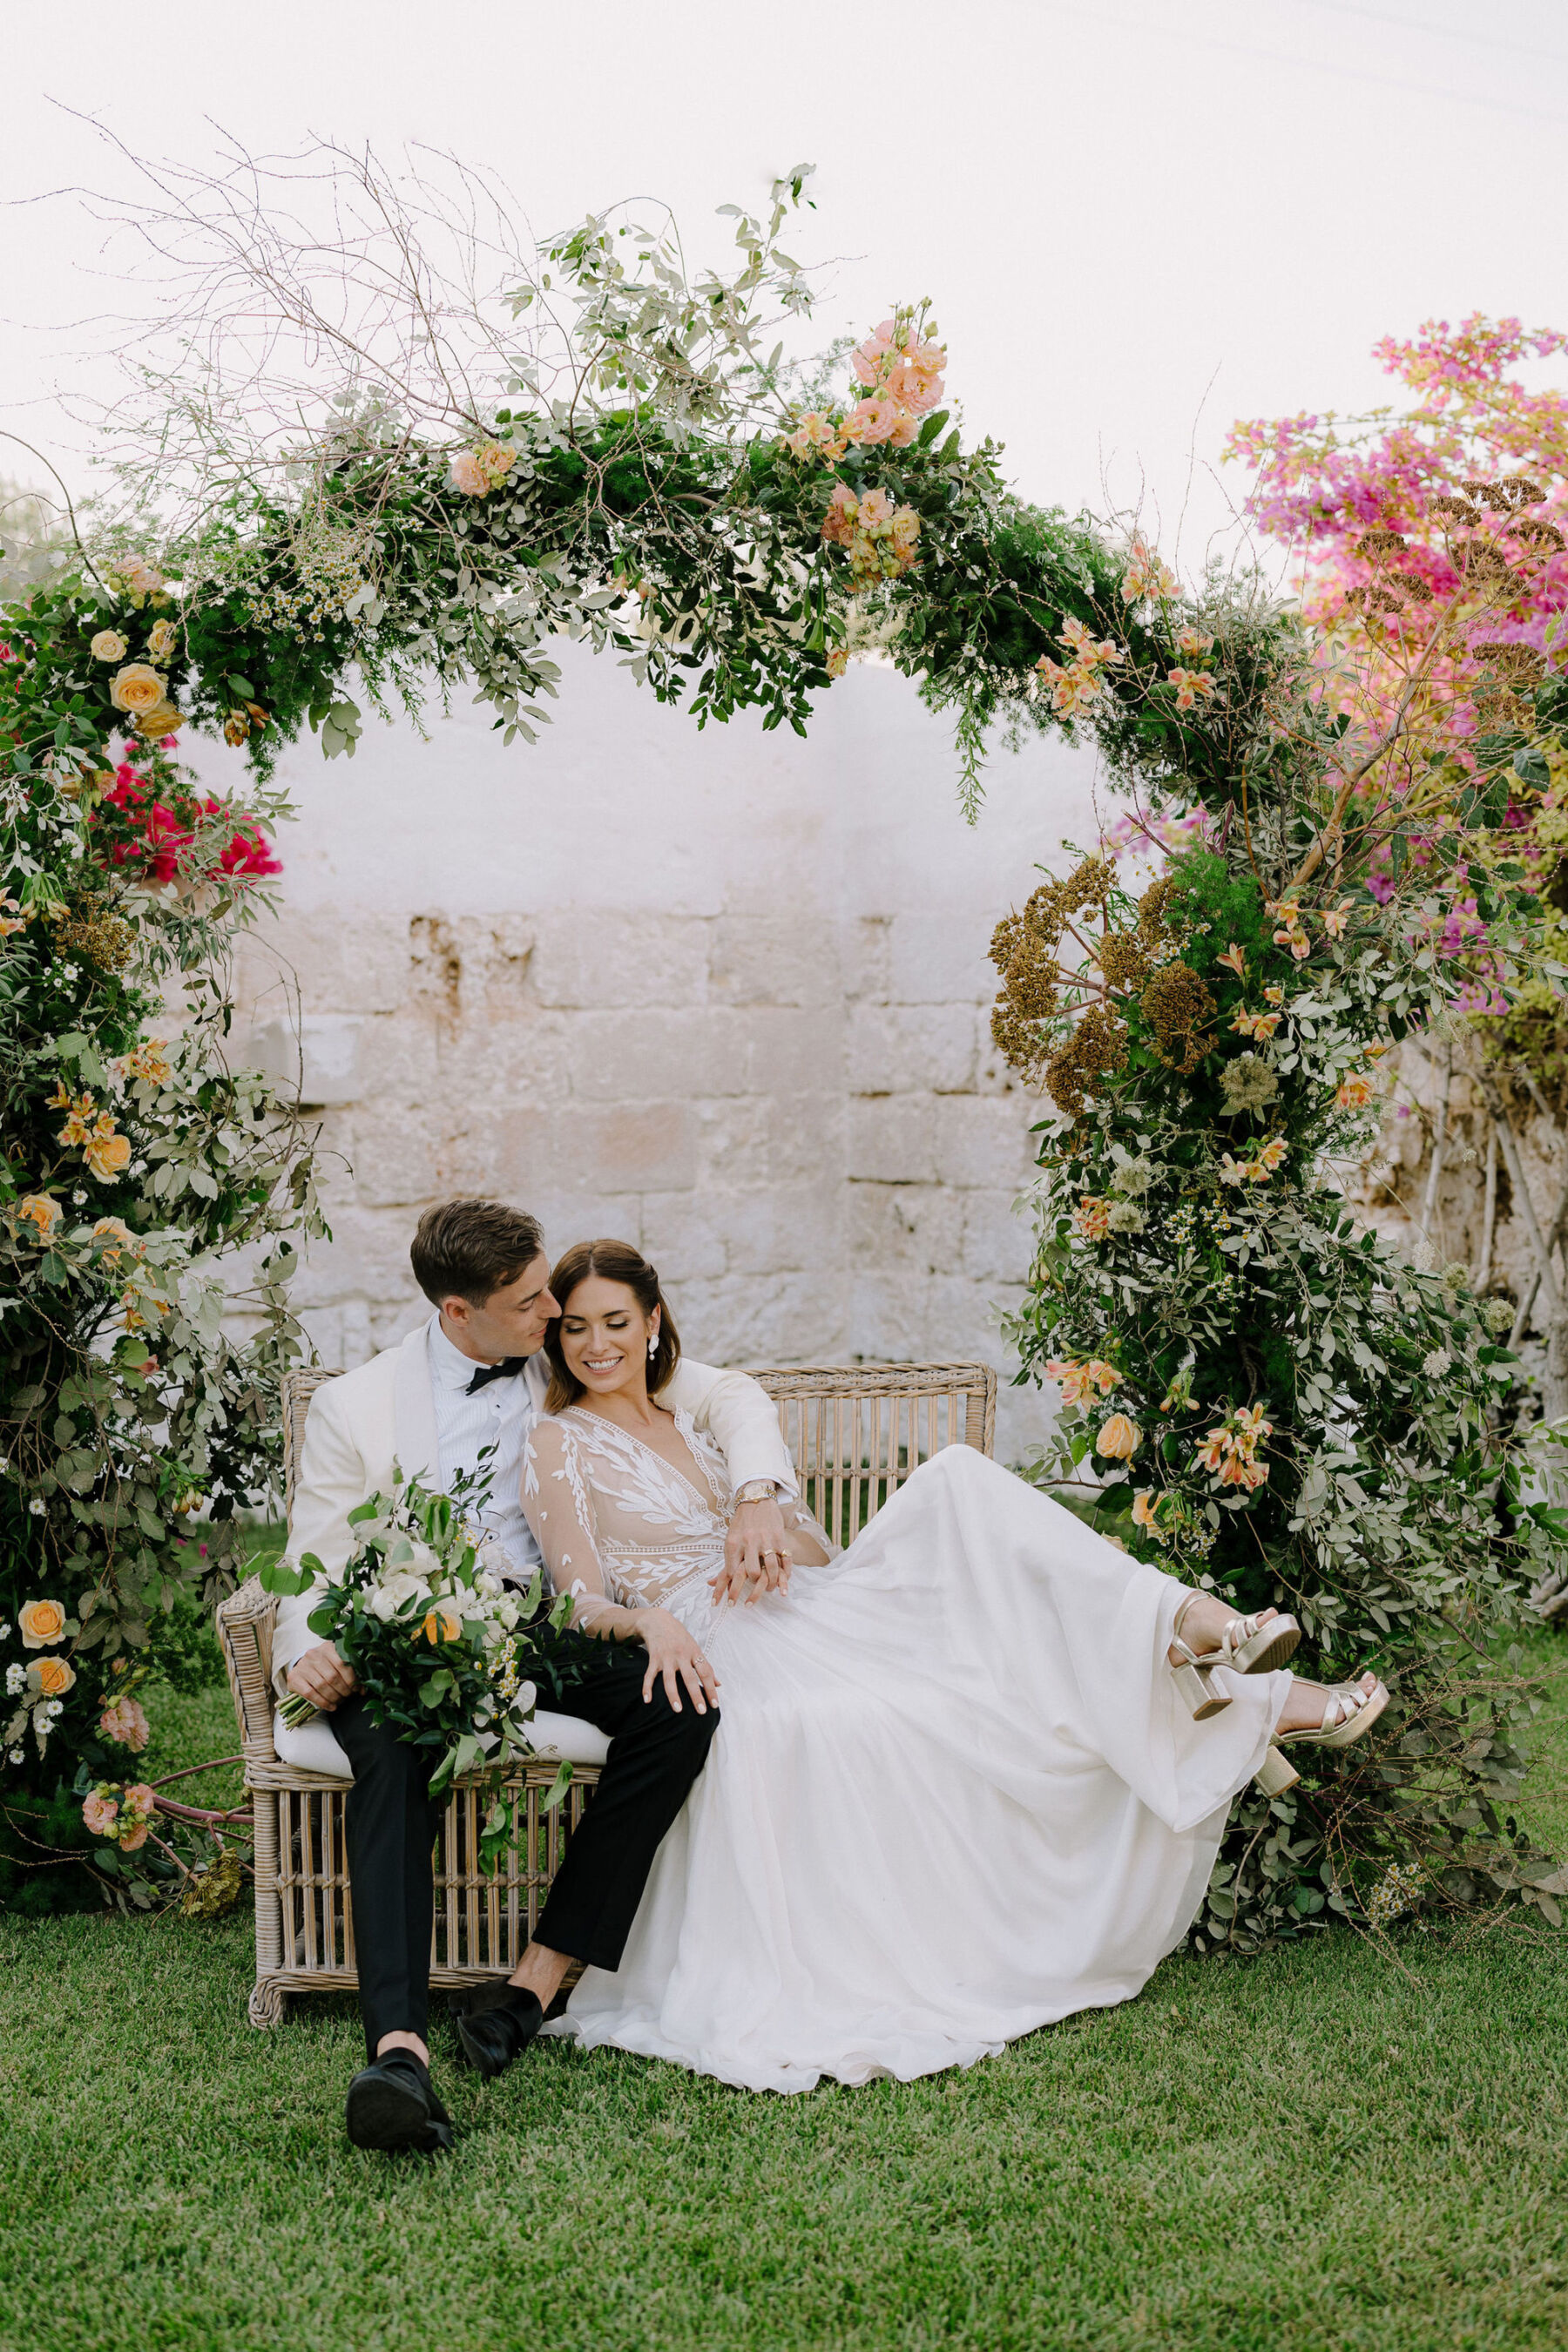 Italian villa weding. Bride and groom sitting under a floral arch in a romantic embrace.